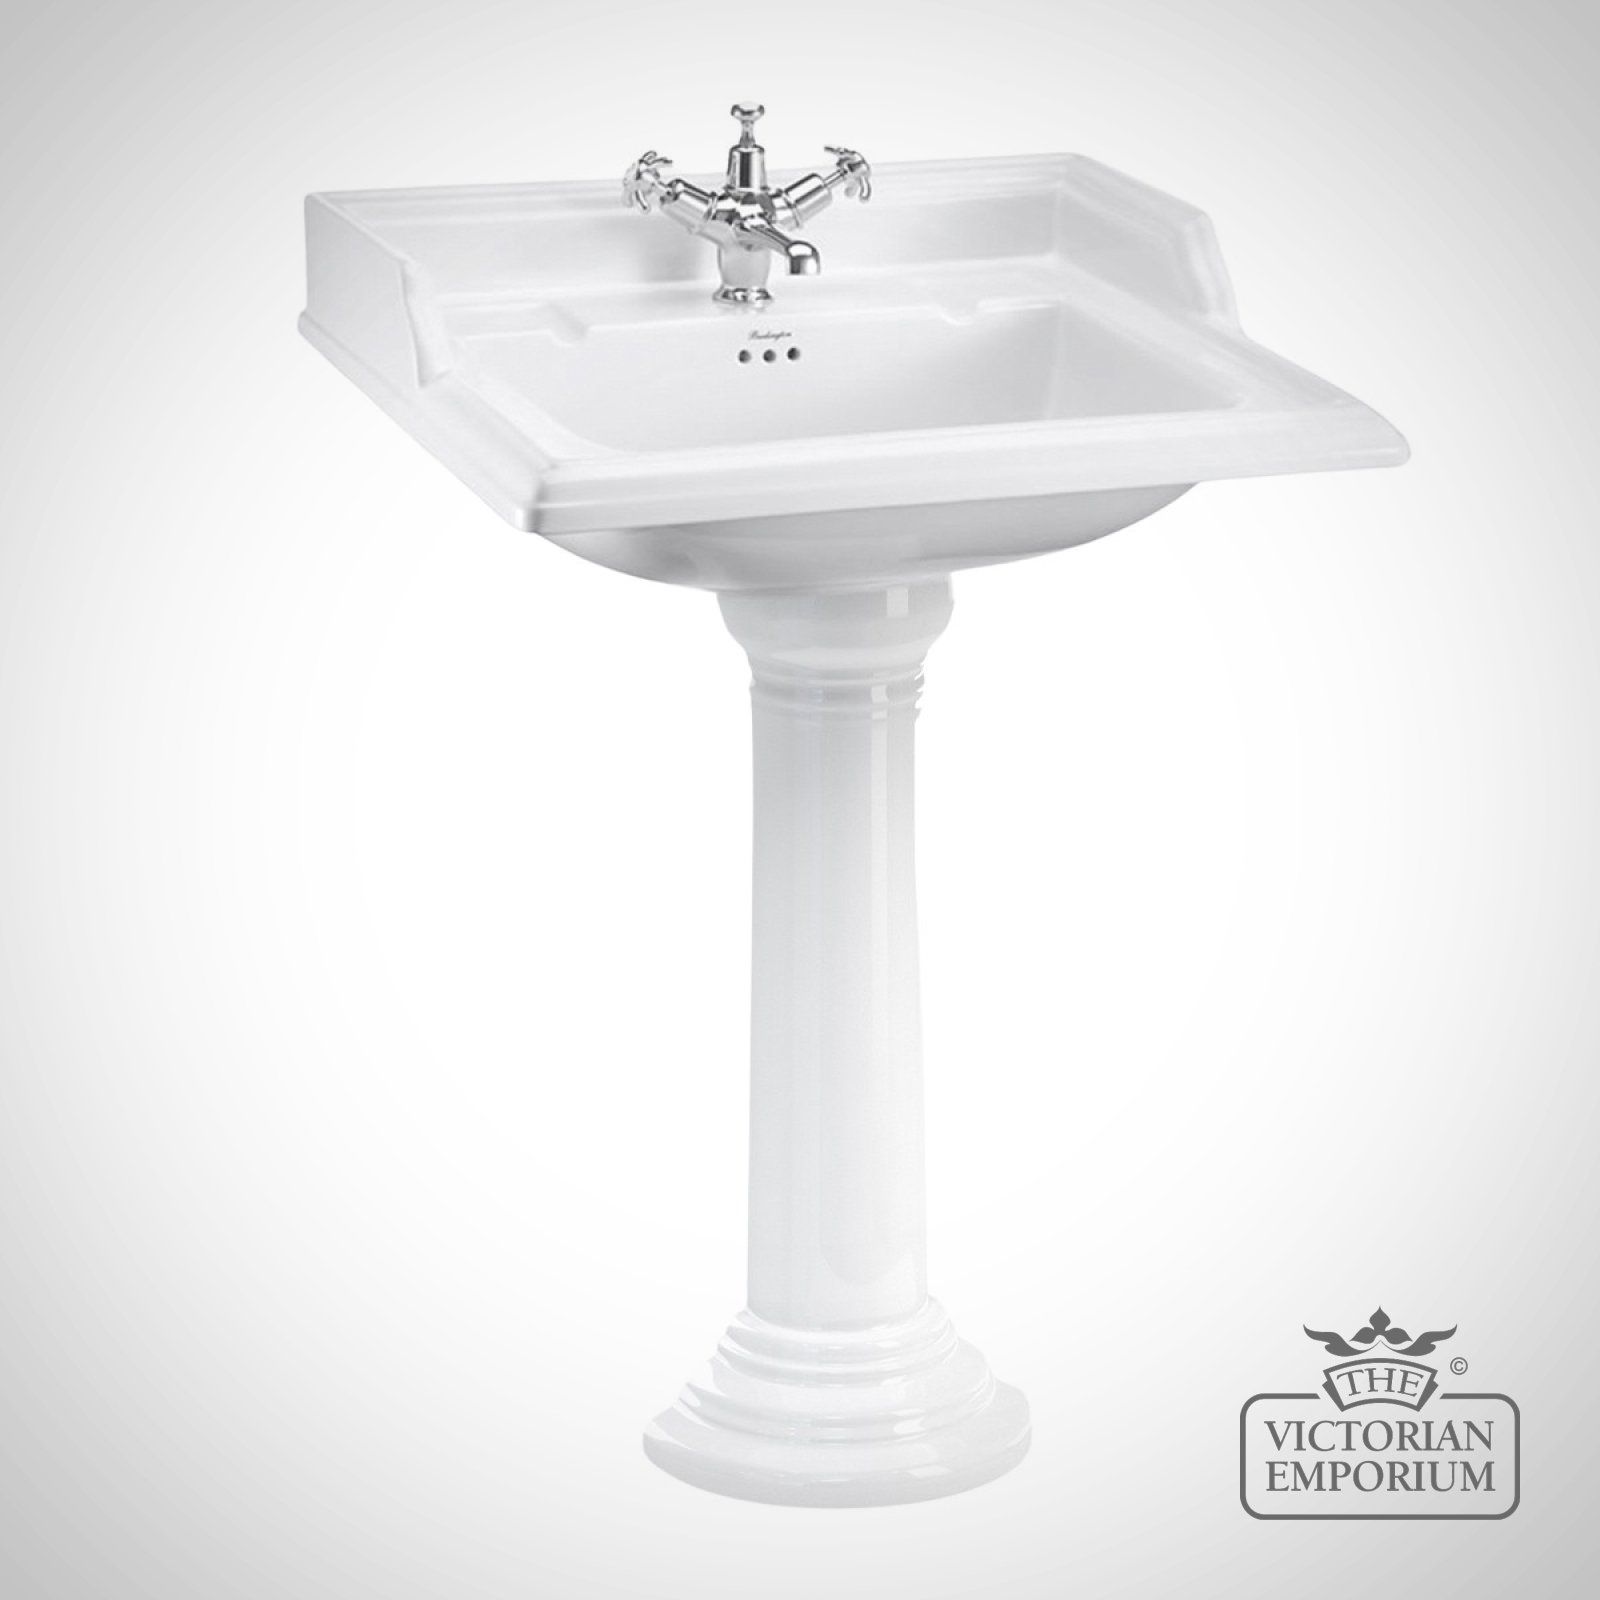 Classic Victorian Square Basin and Pedestal in a choice of sizes